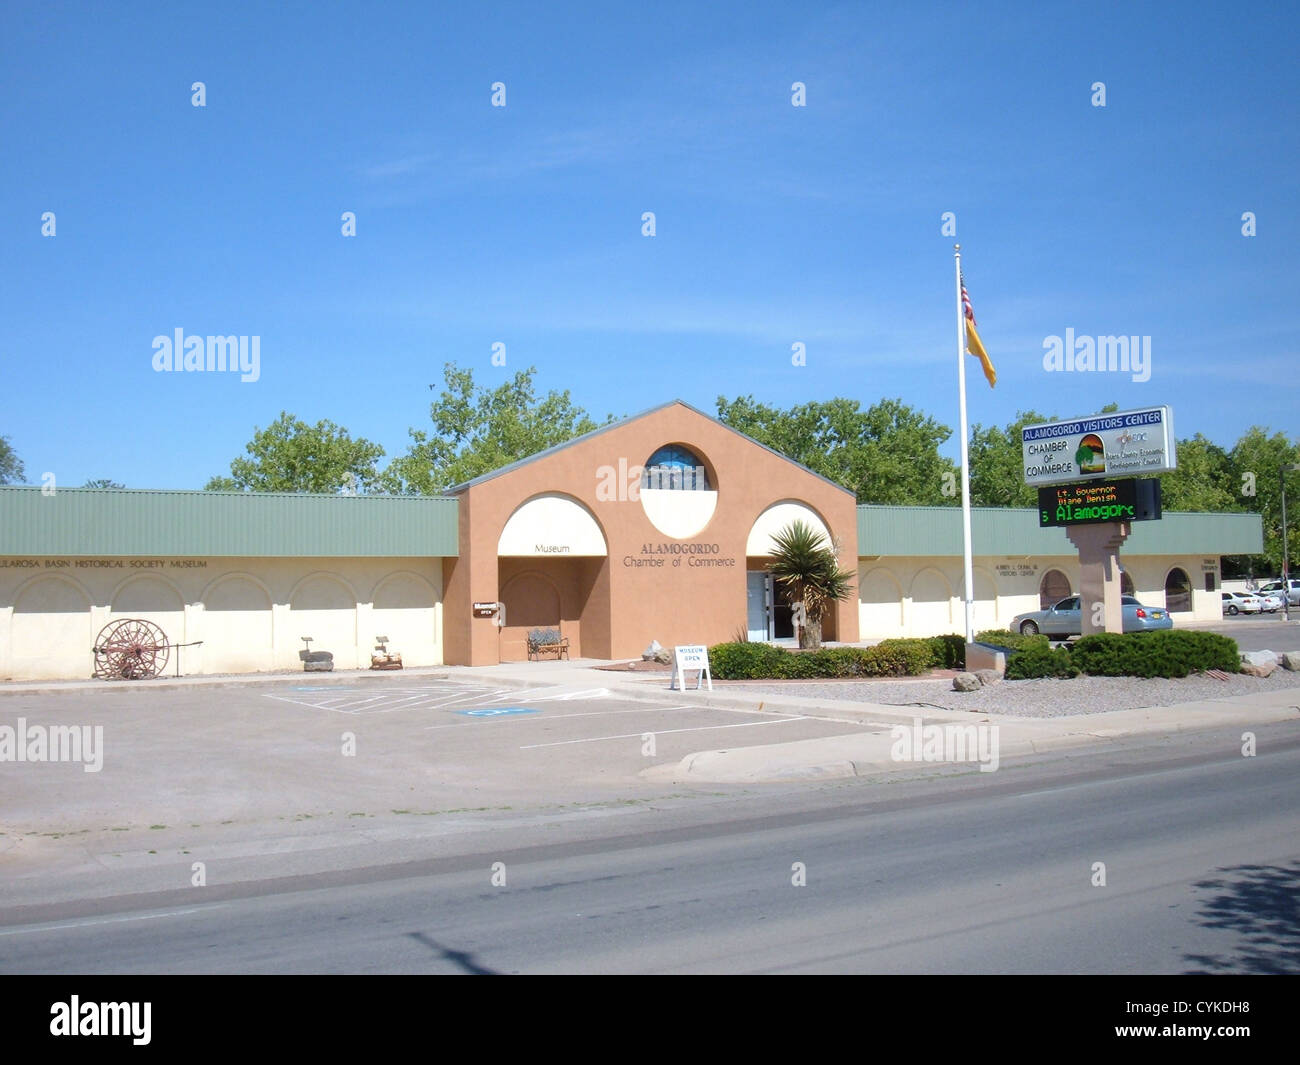 Alamogordo (New Mexico) Visitors Center, located at 1301 N. White Sands Blvd., shares a building with the Alamogordo Chamber of Stock Photo